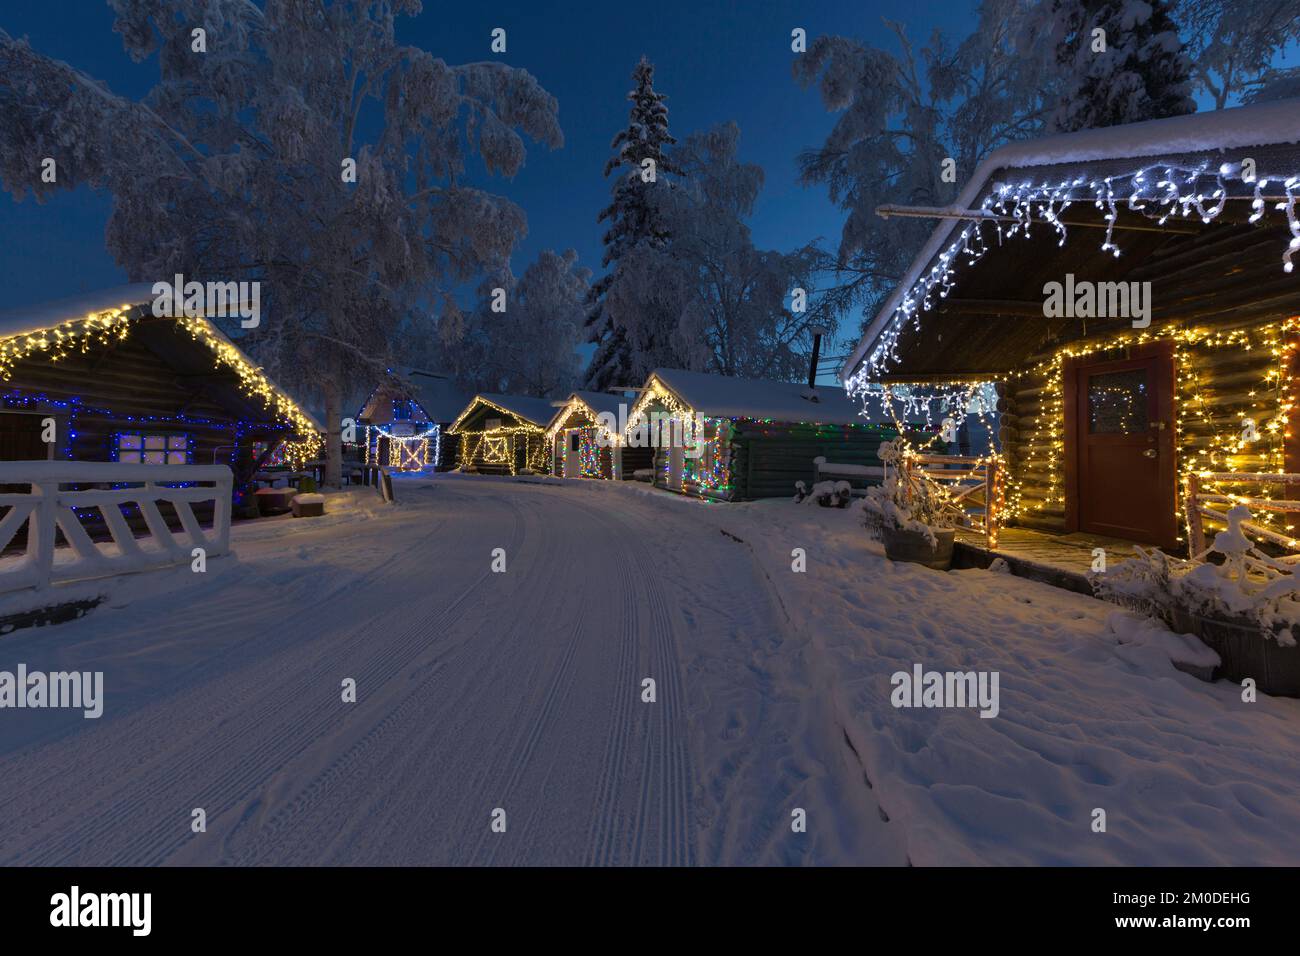 Christmas Decorations on the old cabins in Fairbanks Alaska Stock Photo